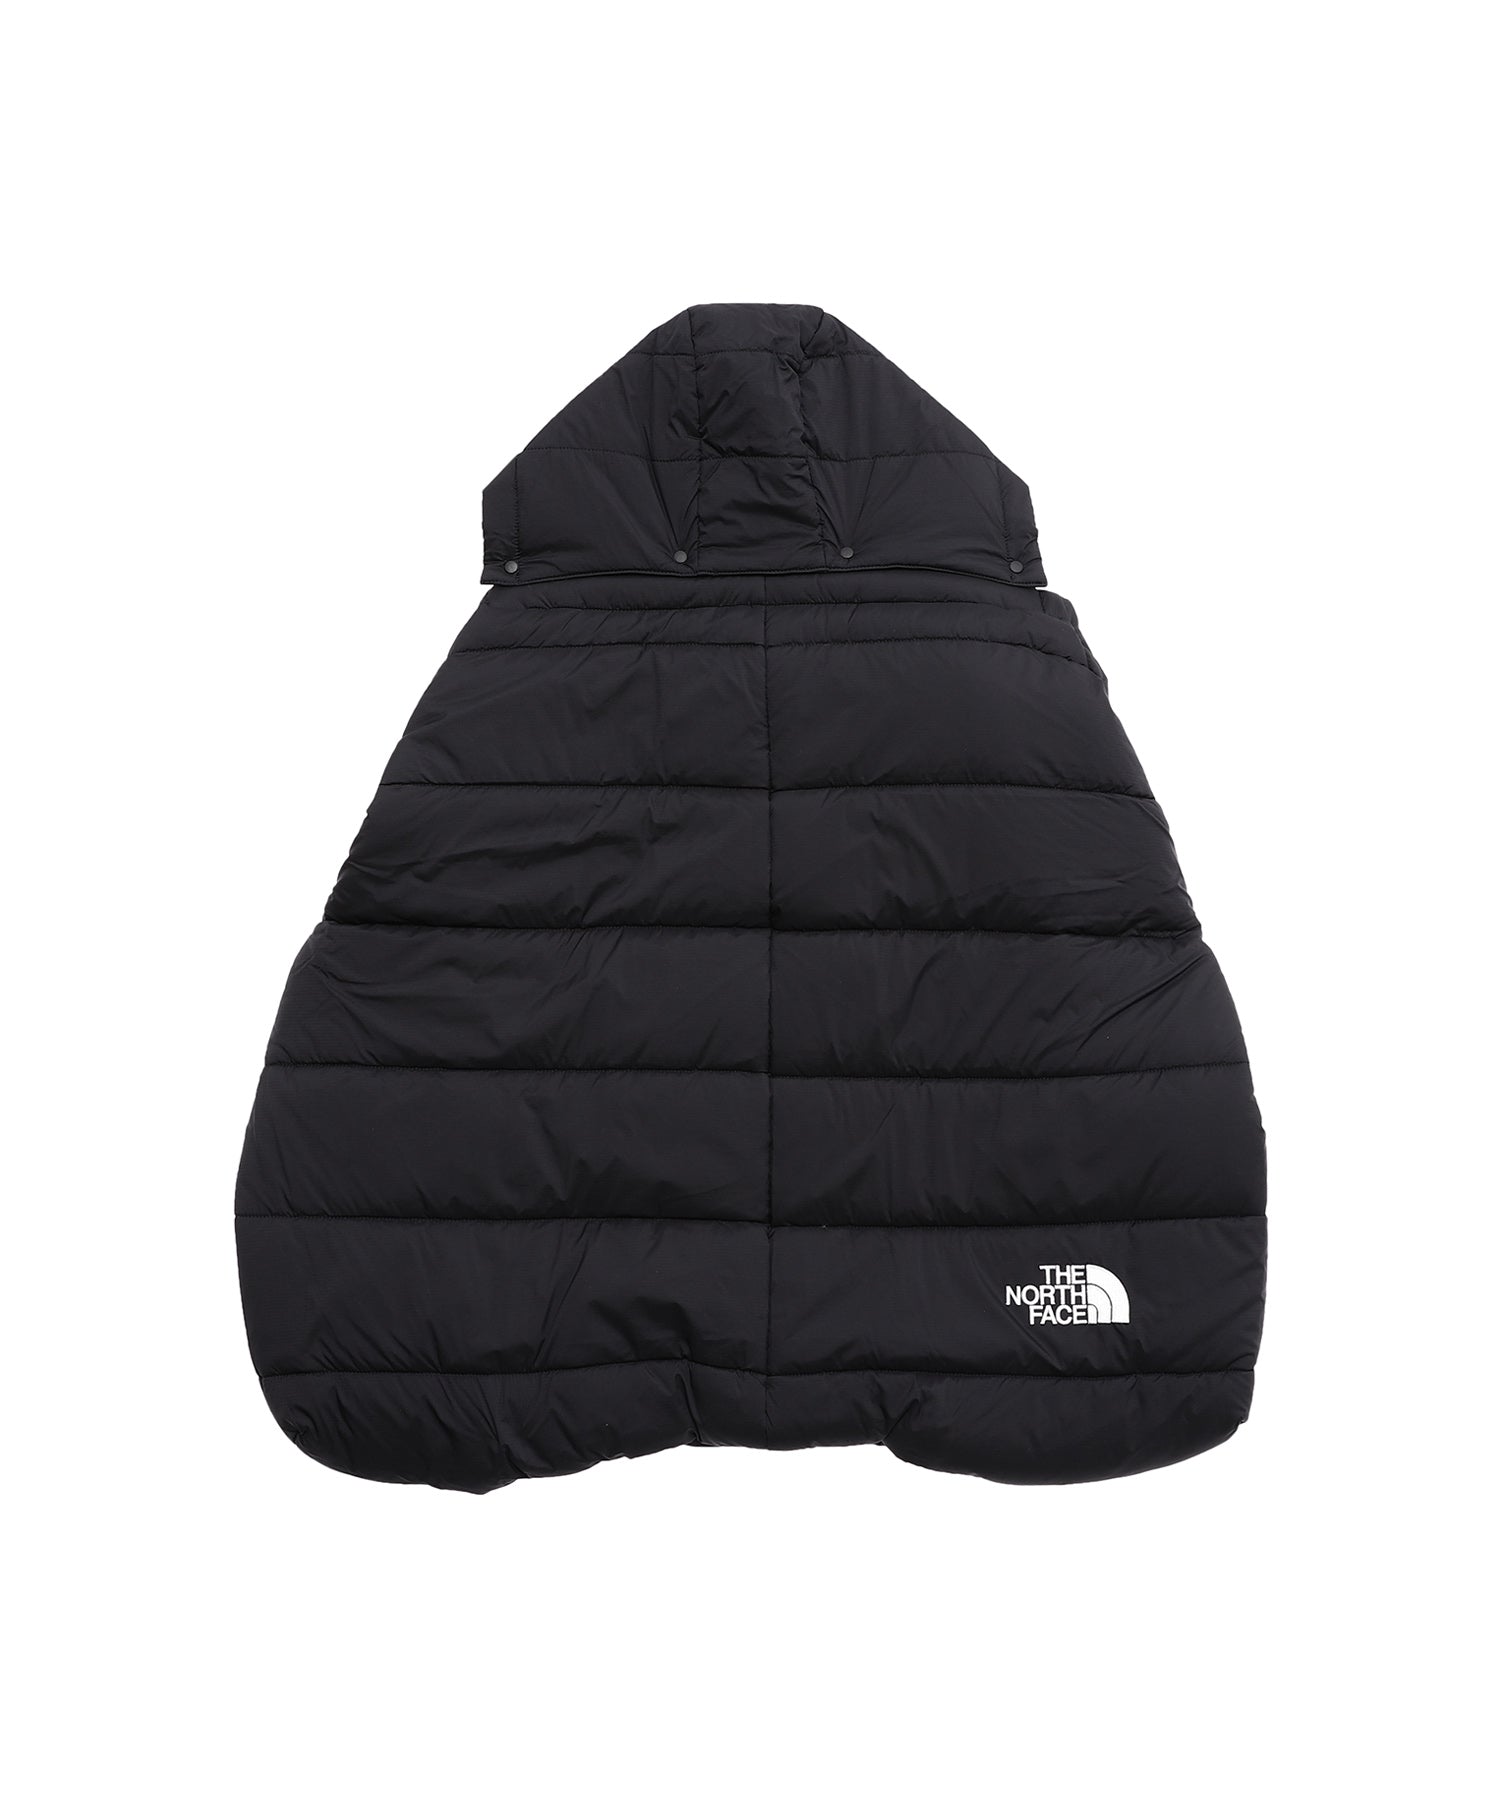 North Face Baby Shell Blanket Black